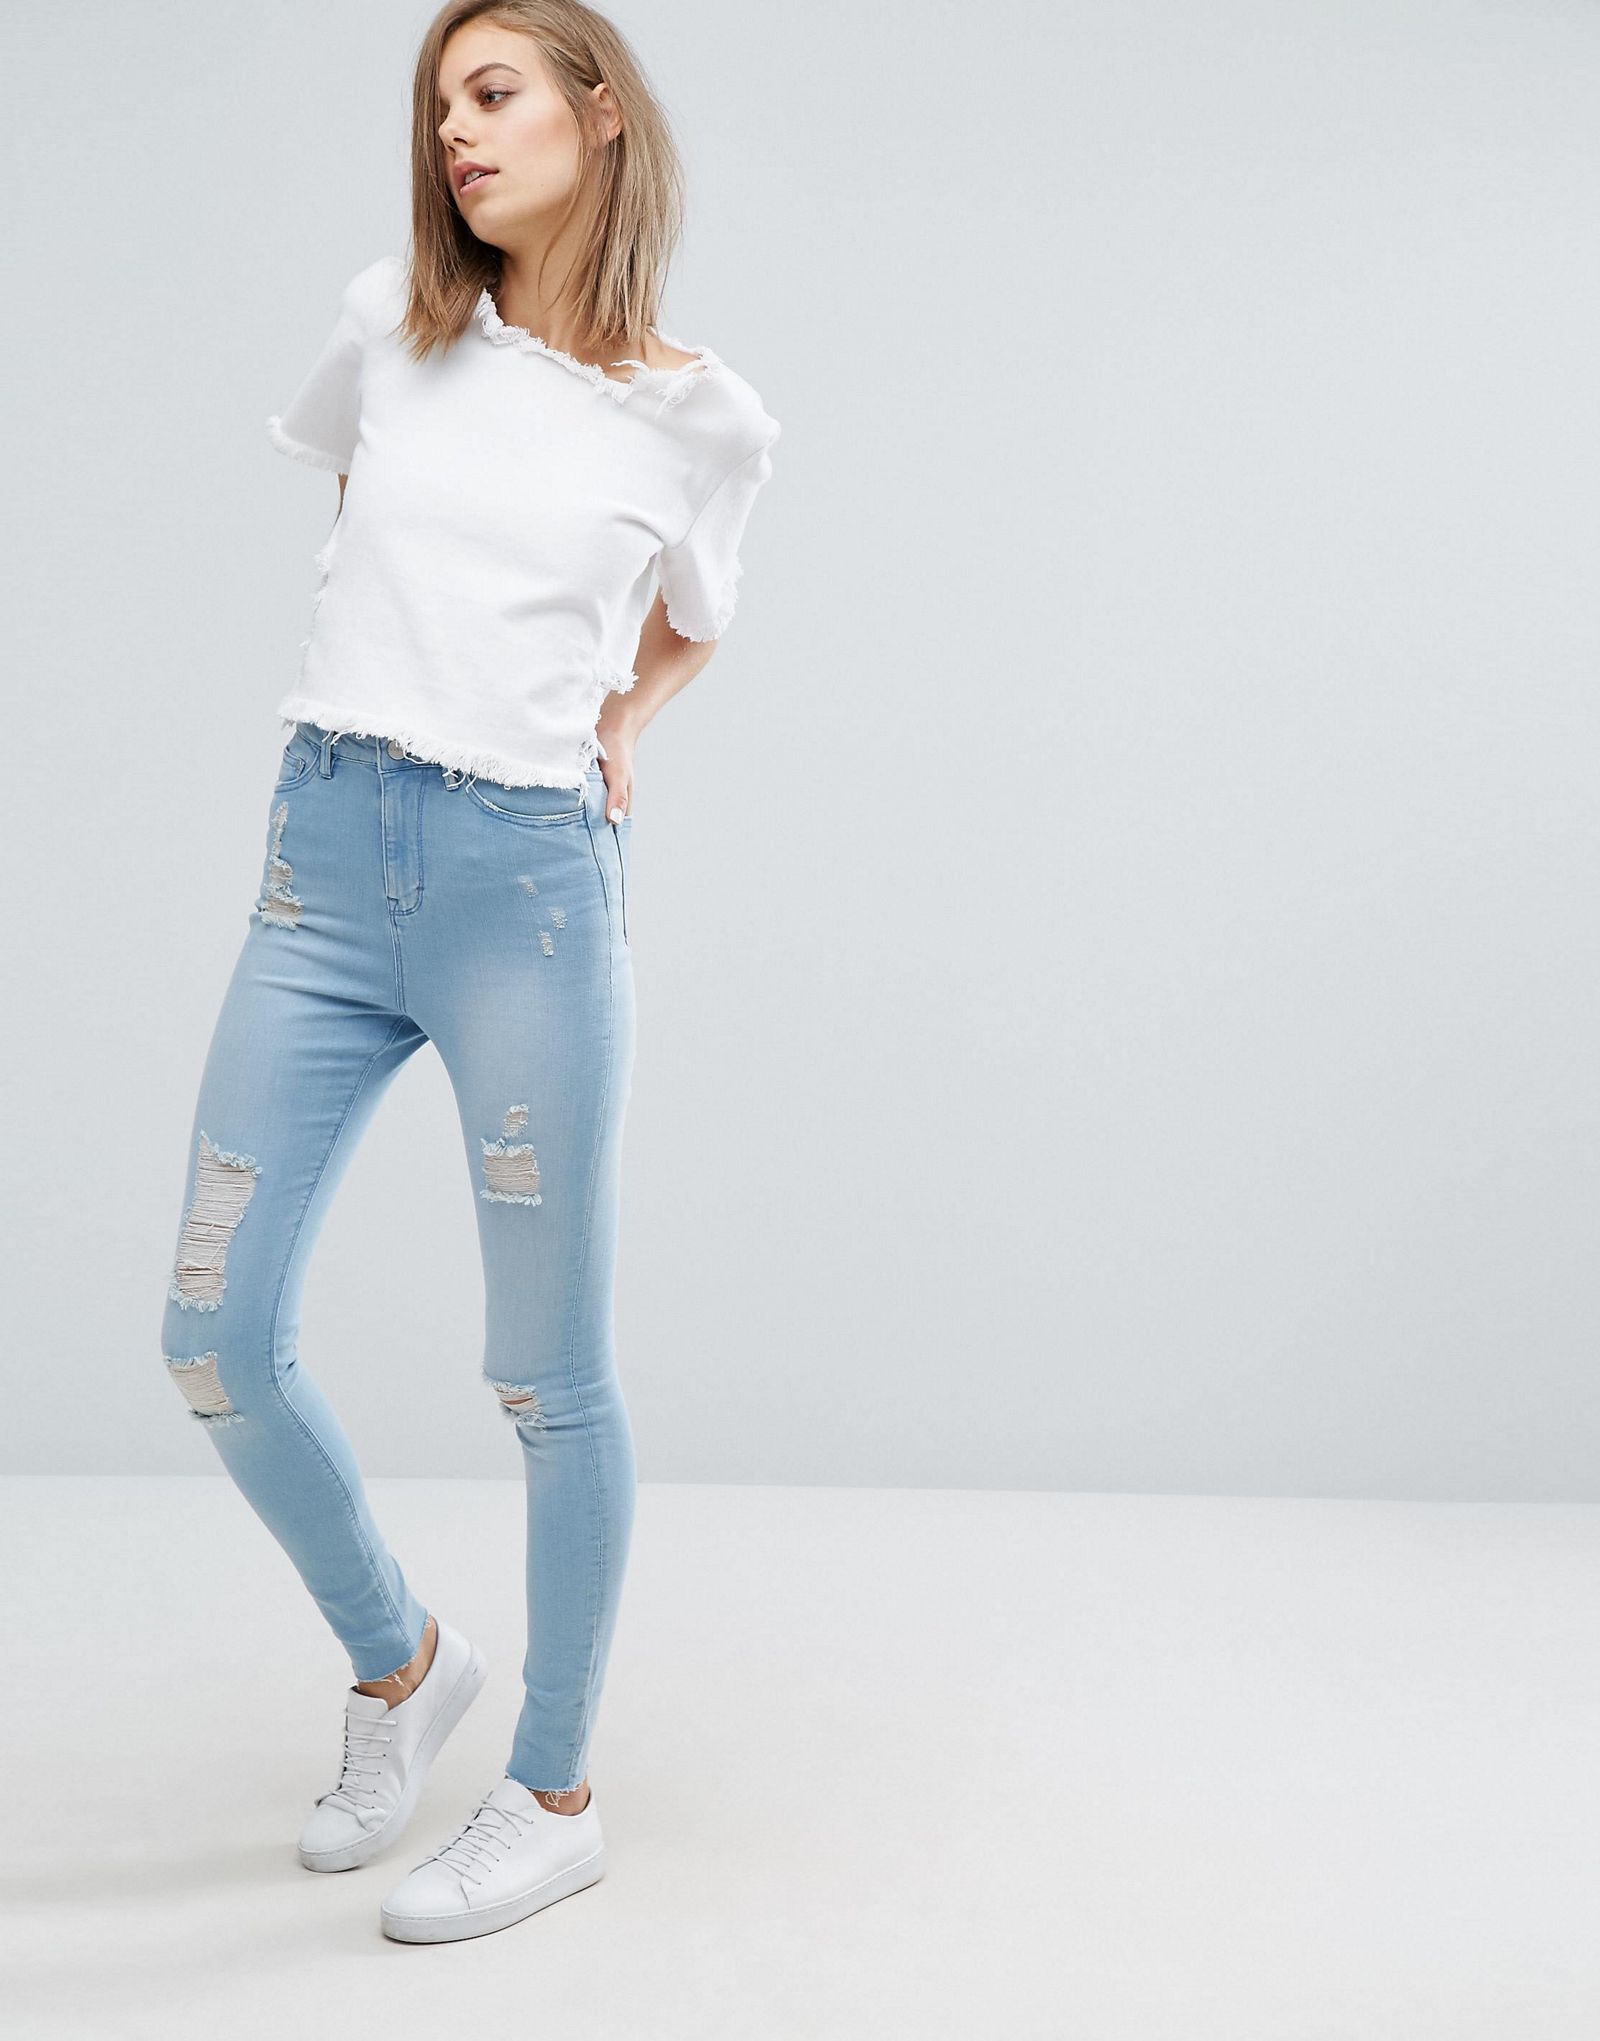 Waven Anika High Waist Skinny Jeans with Abrasions